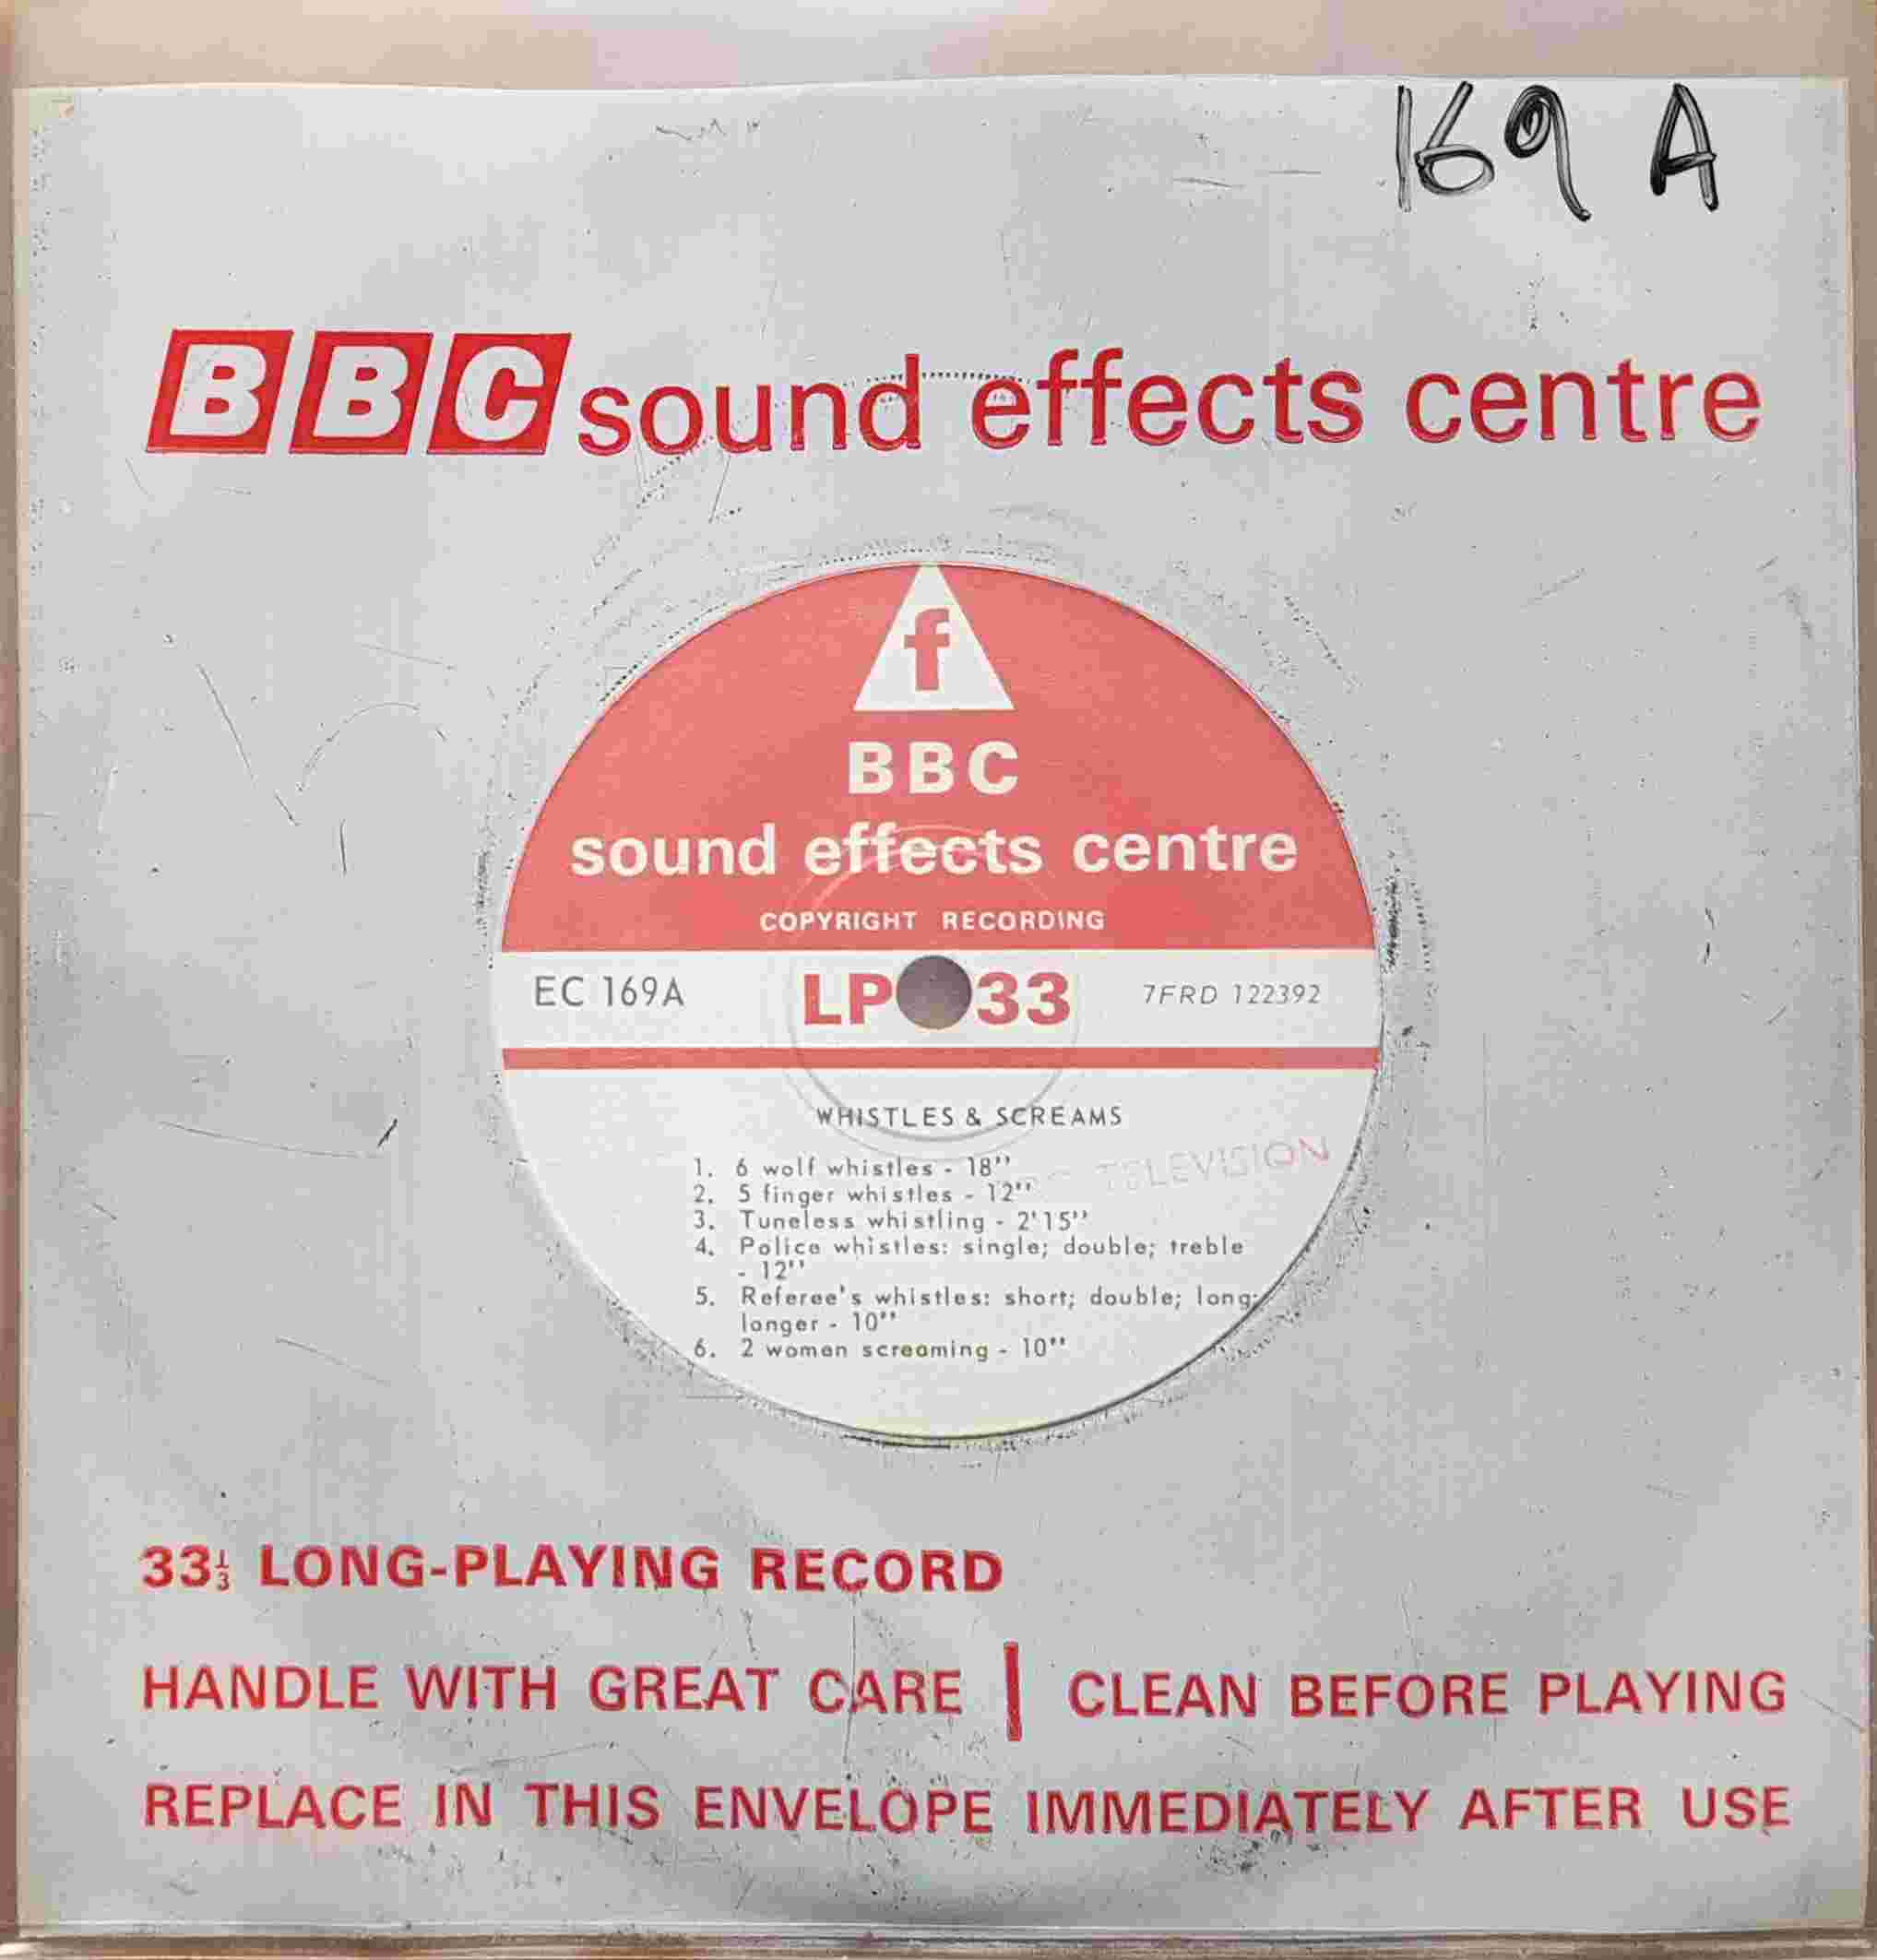 Picture of EC 169A Screams by artist Not registered from the BBC records and Tapes library